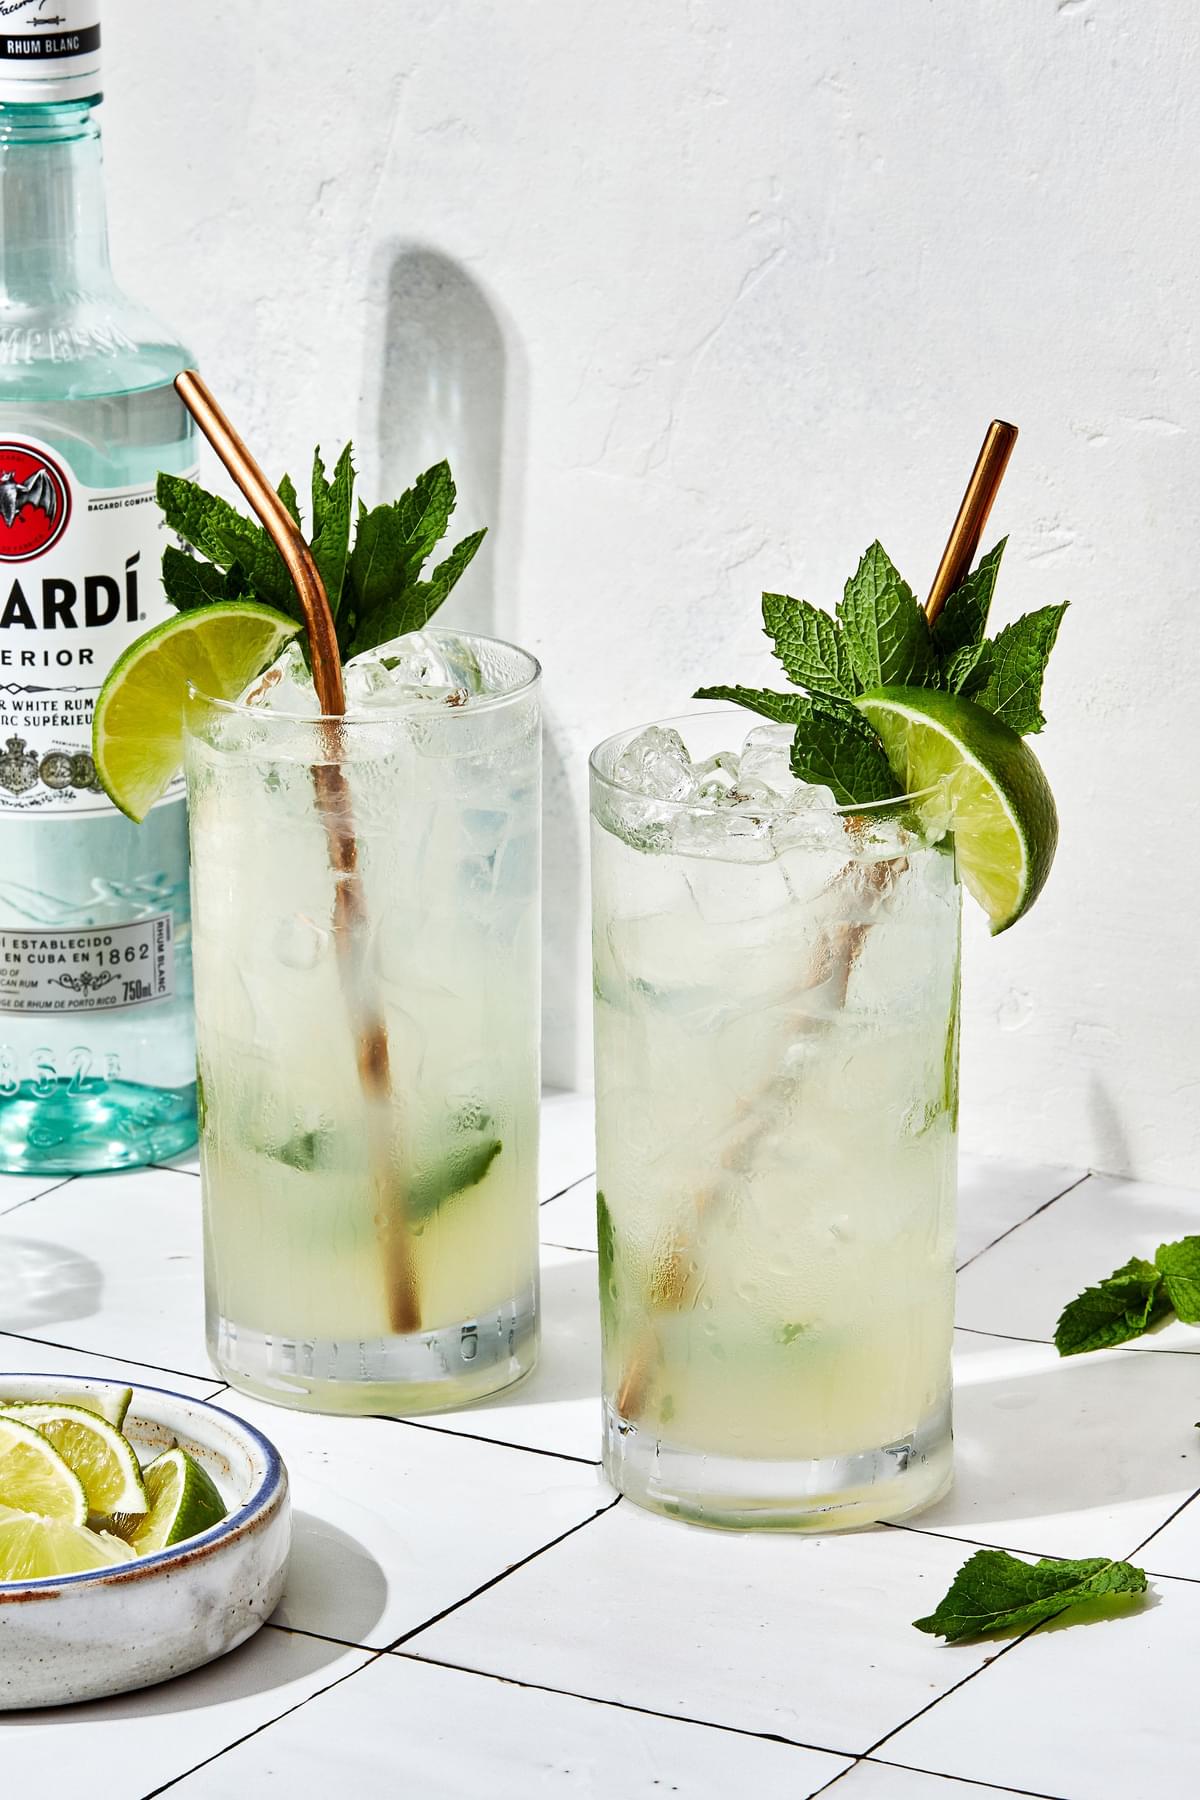 2 Mojitos over ice made with lime juice, sugar, mint, rum and soda water garnished with fresh mint leaves and lime wedge